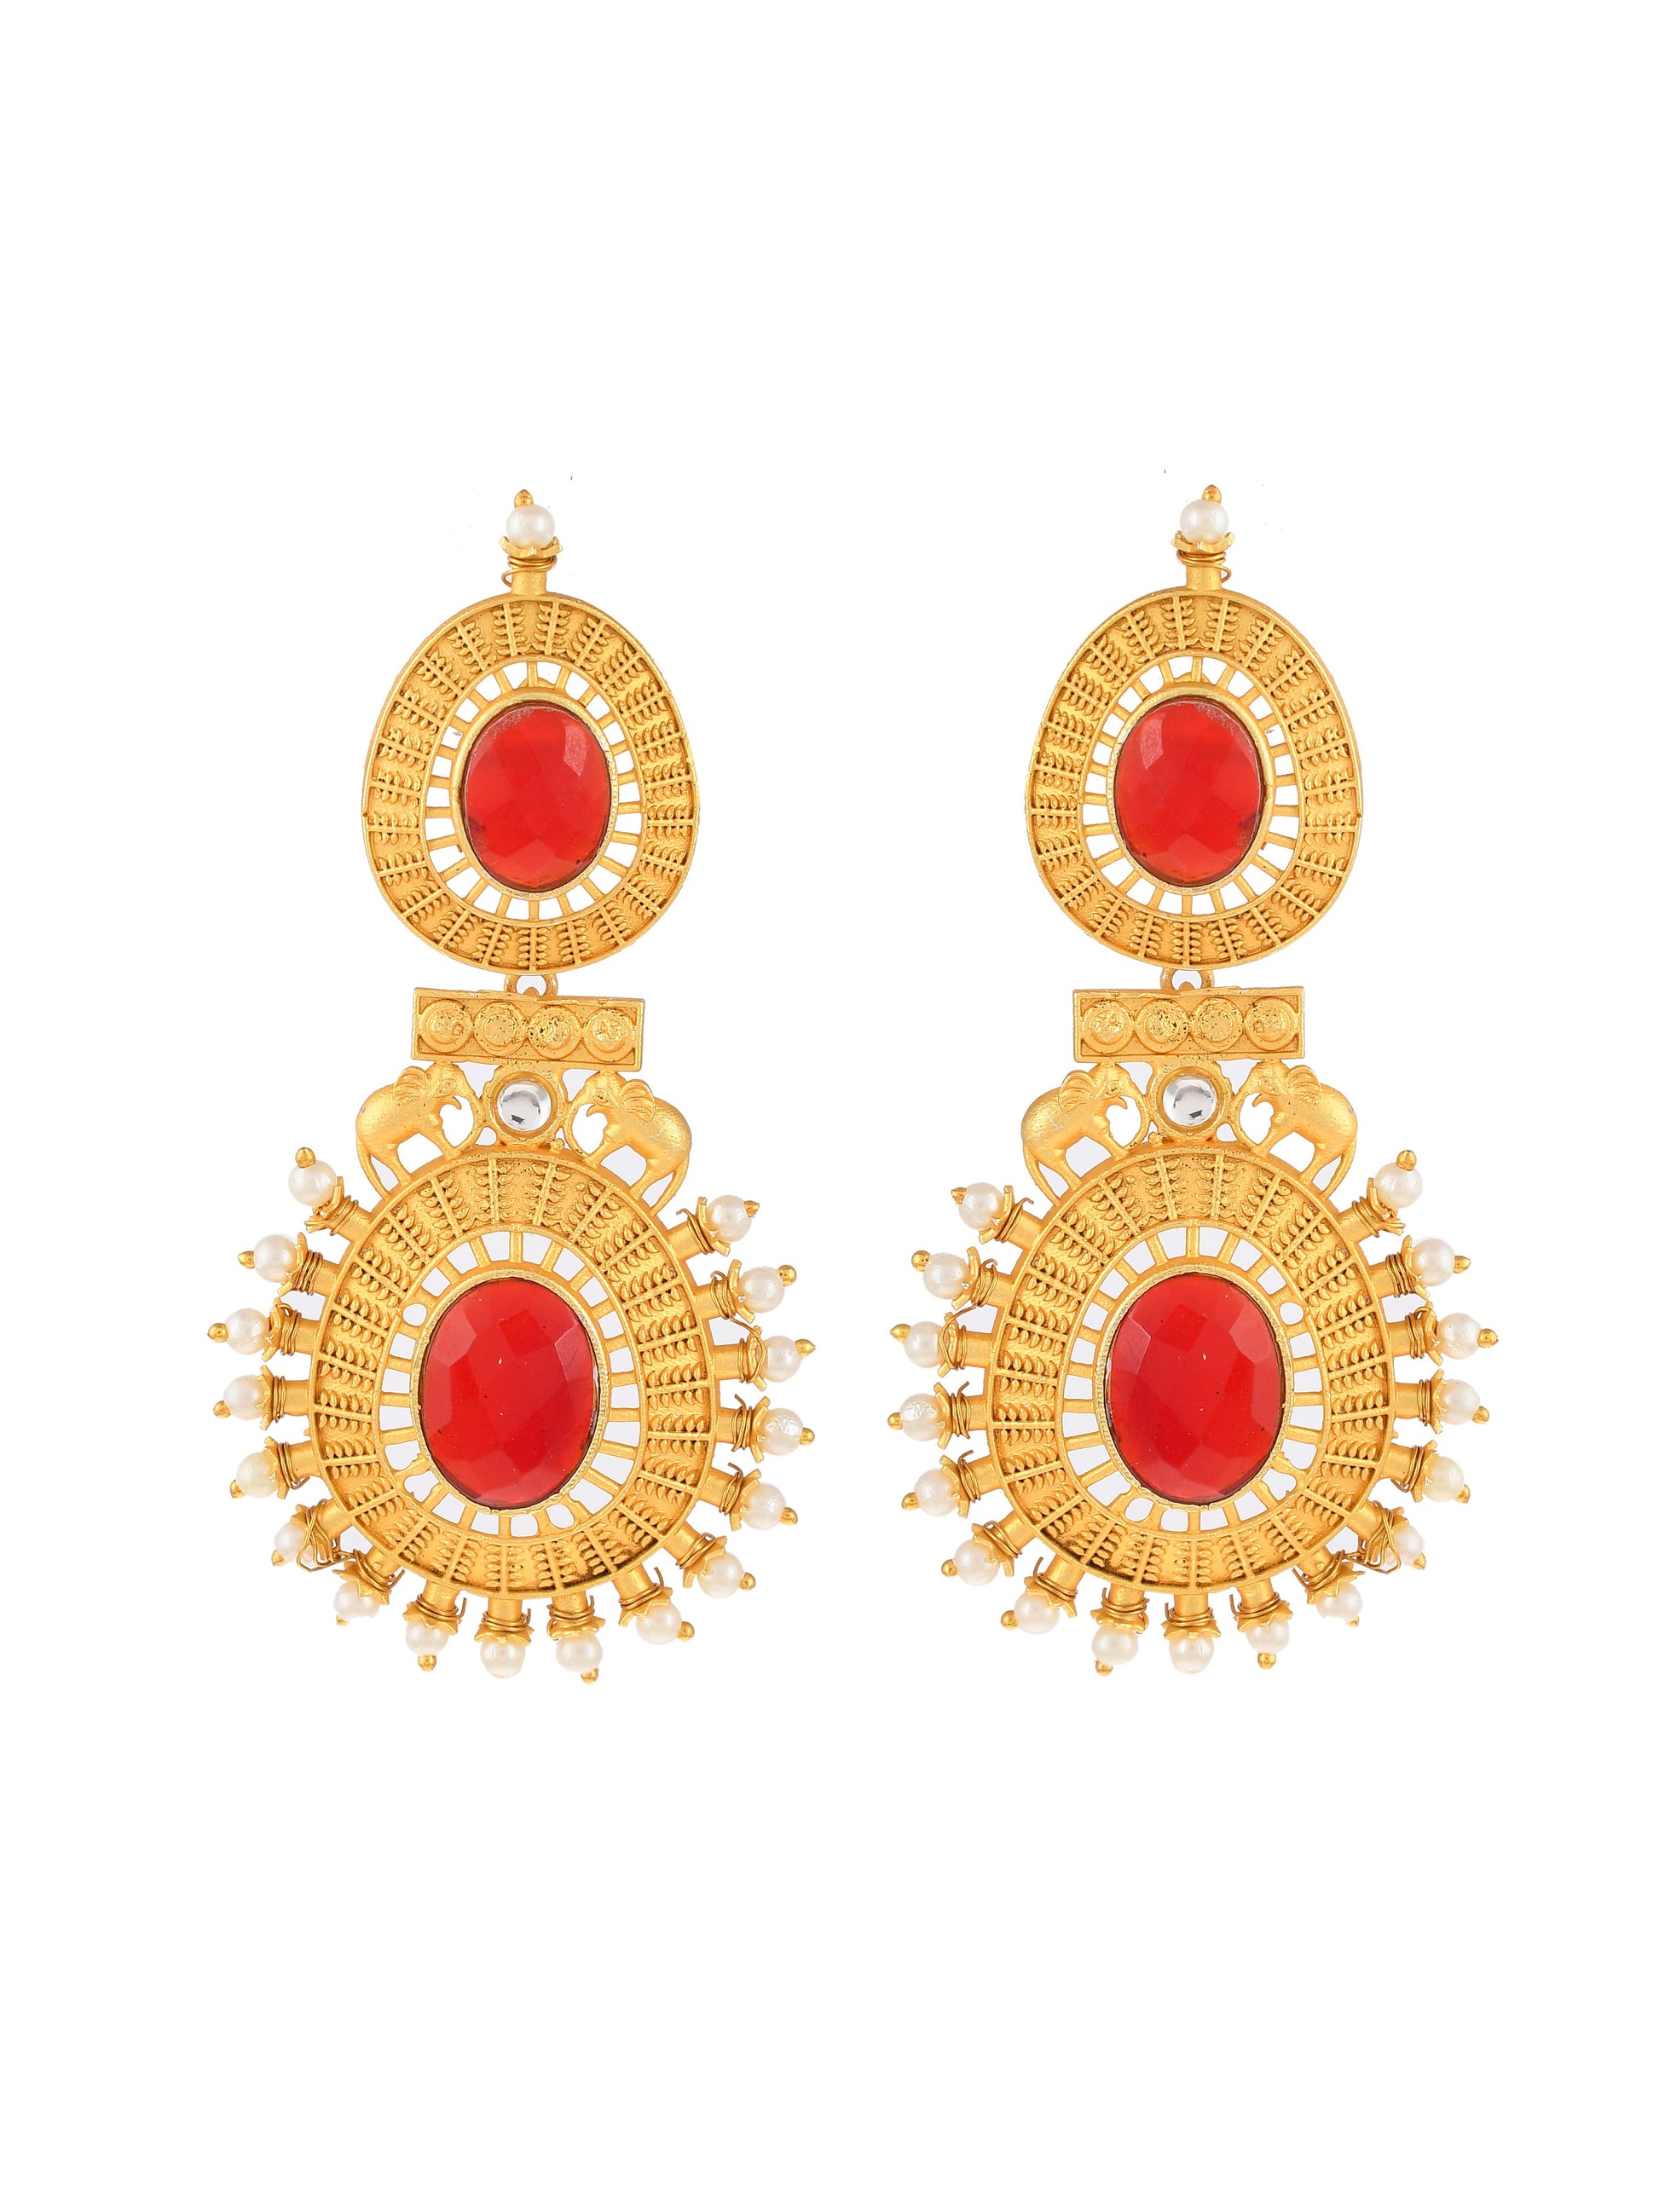 Gold-Plated Classic Drop Earrings